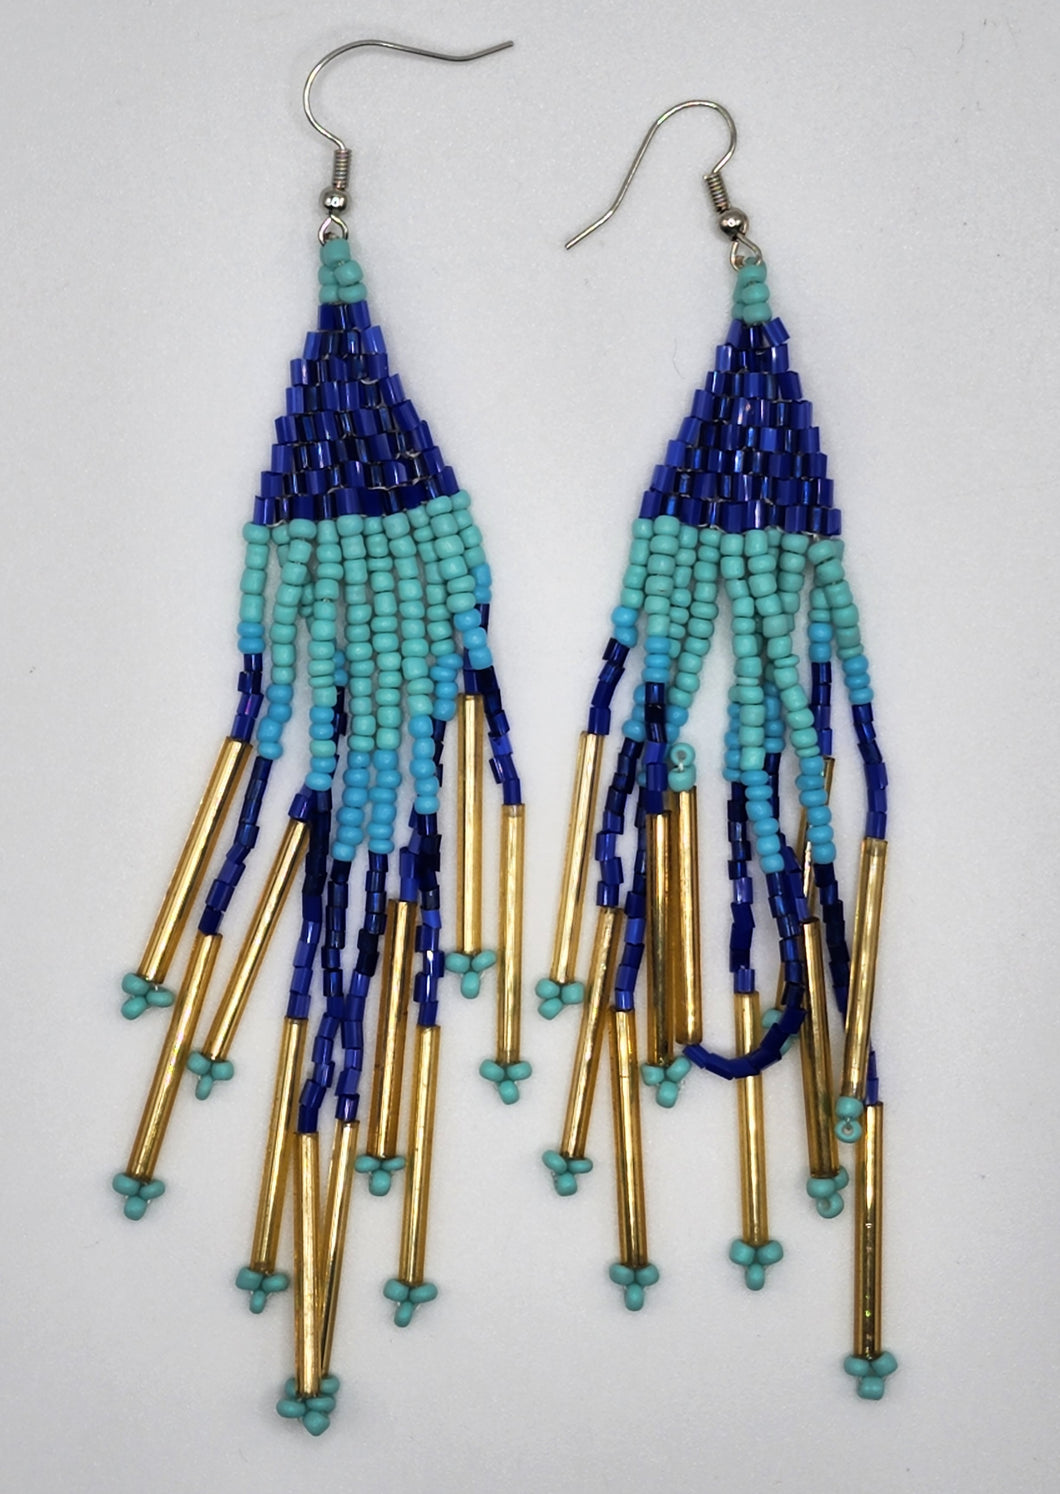 Cobalt Blue, Turquoise, and Gold Seed Bead Long Dangle Earrings